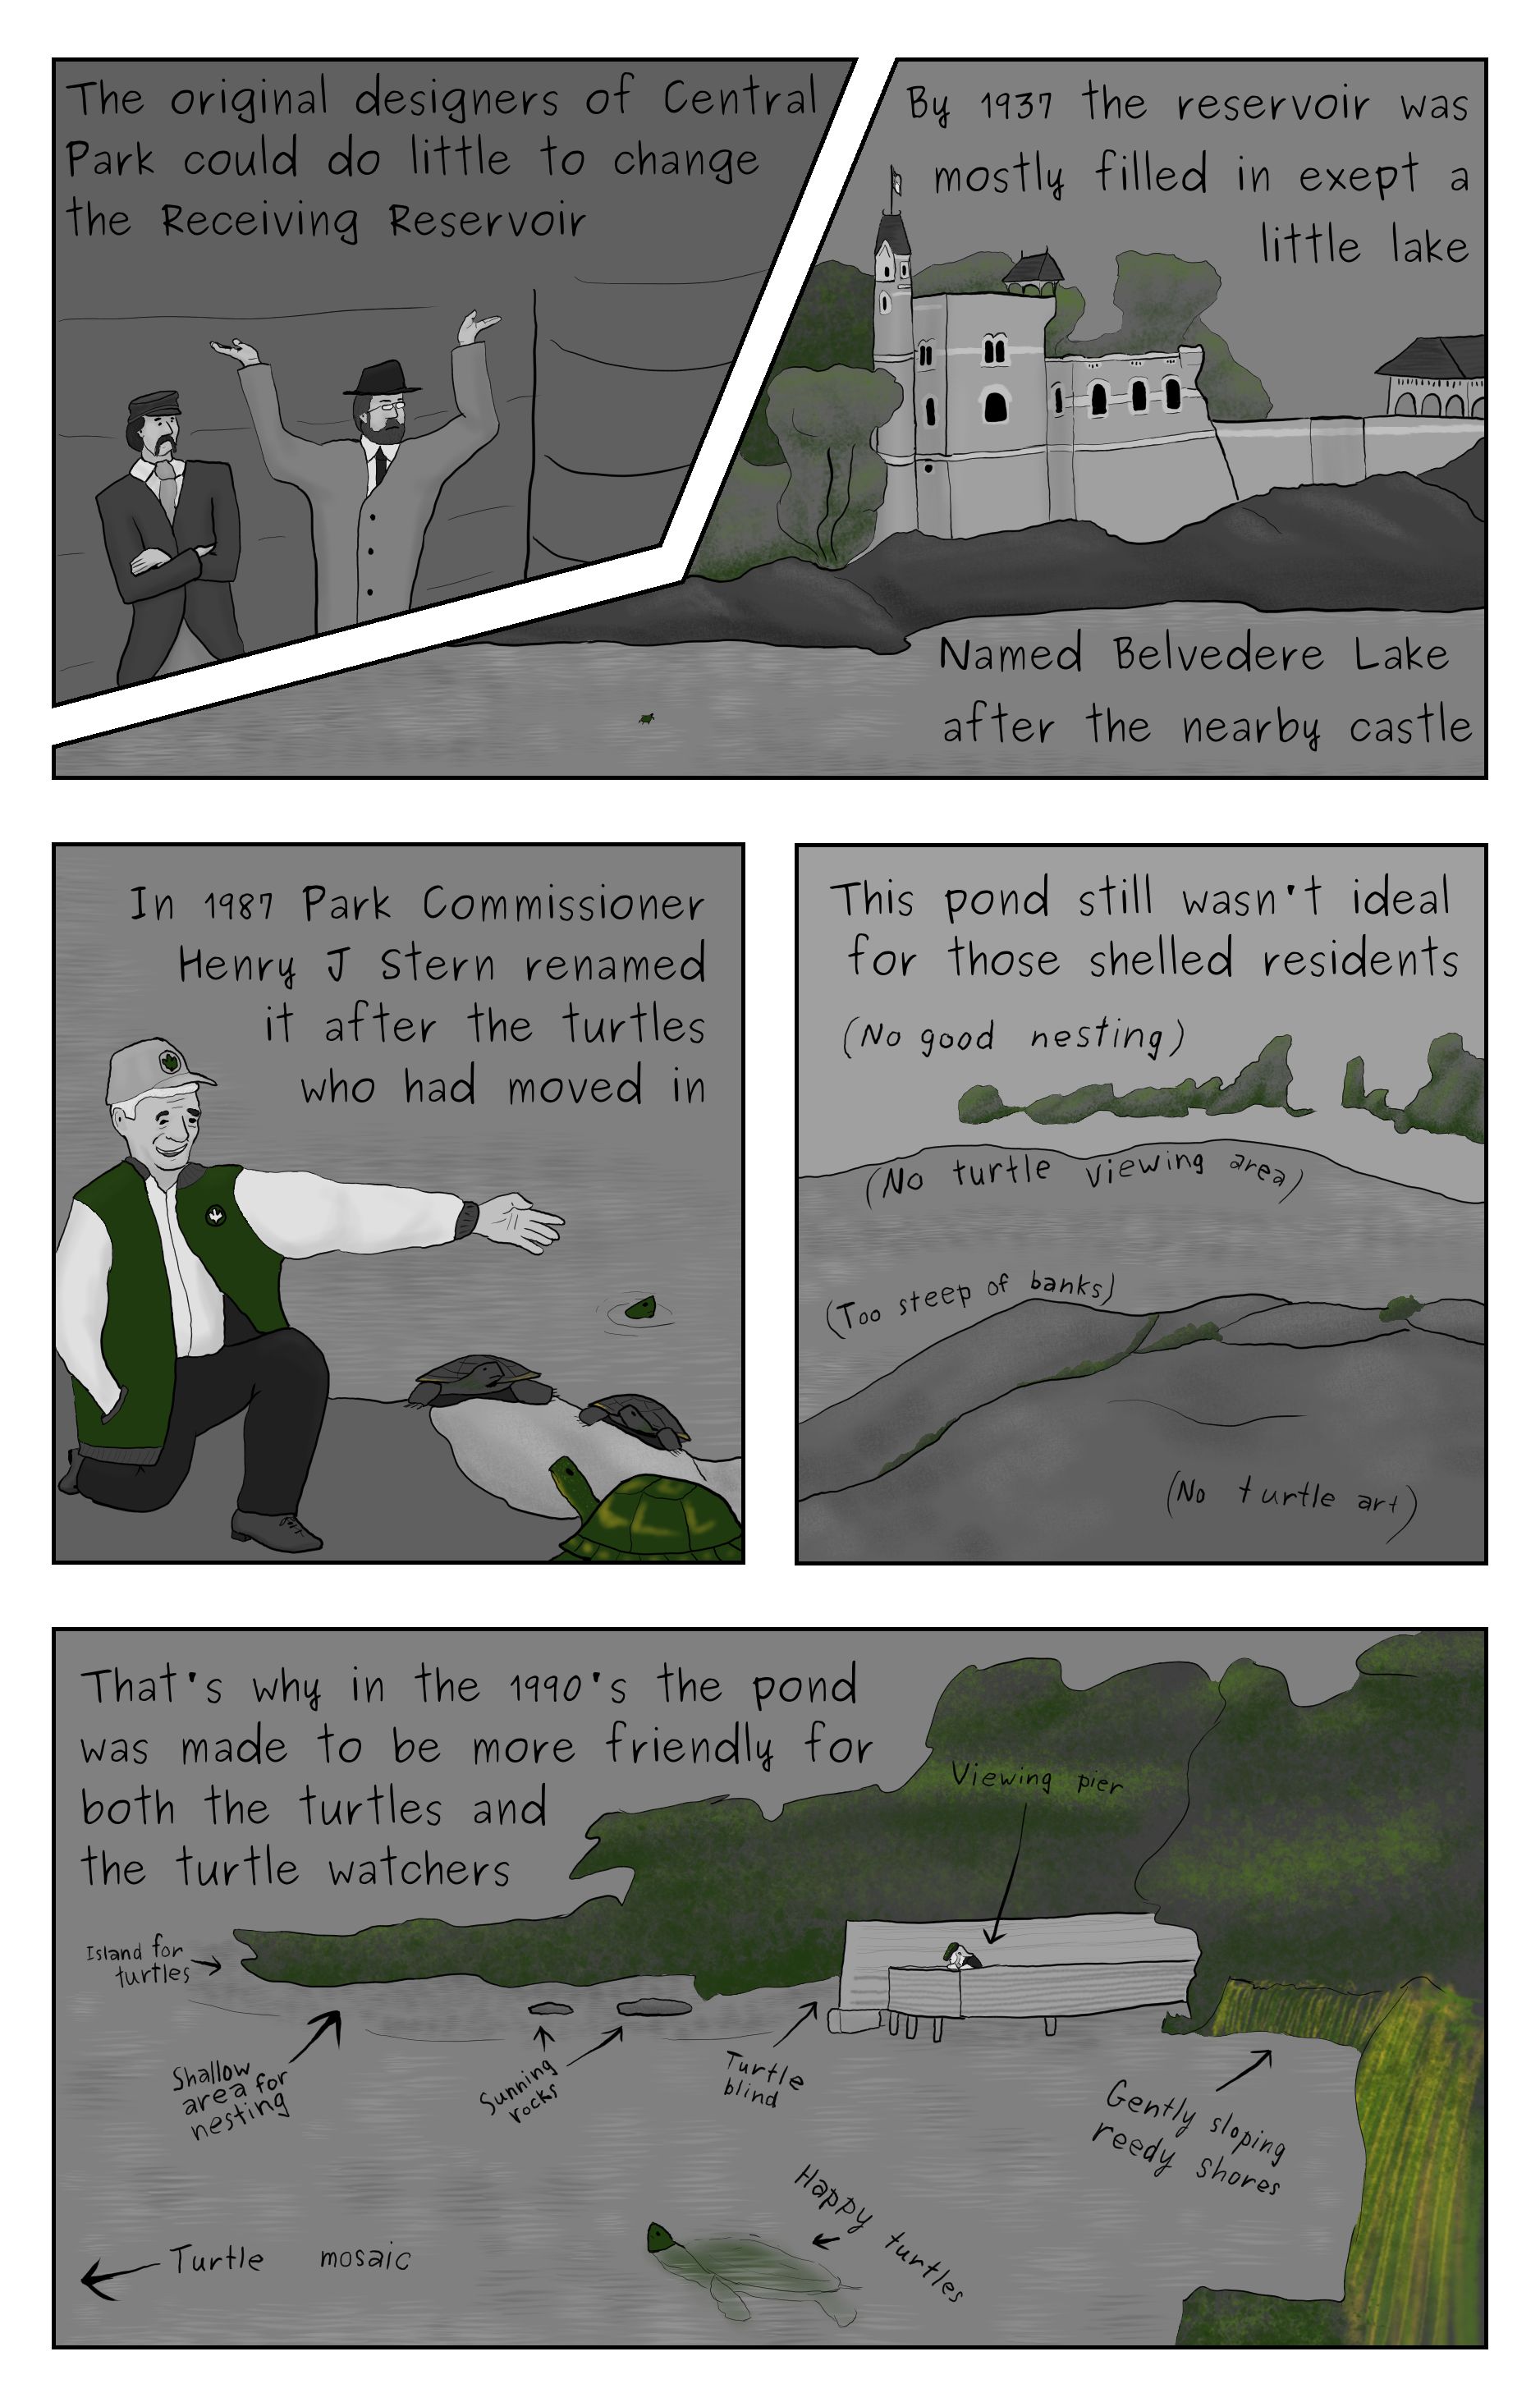 A comic featuring the Turtle Pond in Central Park, a shocase of turtles found in Central Park, an easten painted turtle climbing over rocks, then looking up at a resoviur, and the old reciving rsoviour.